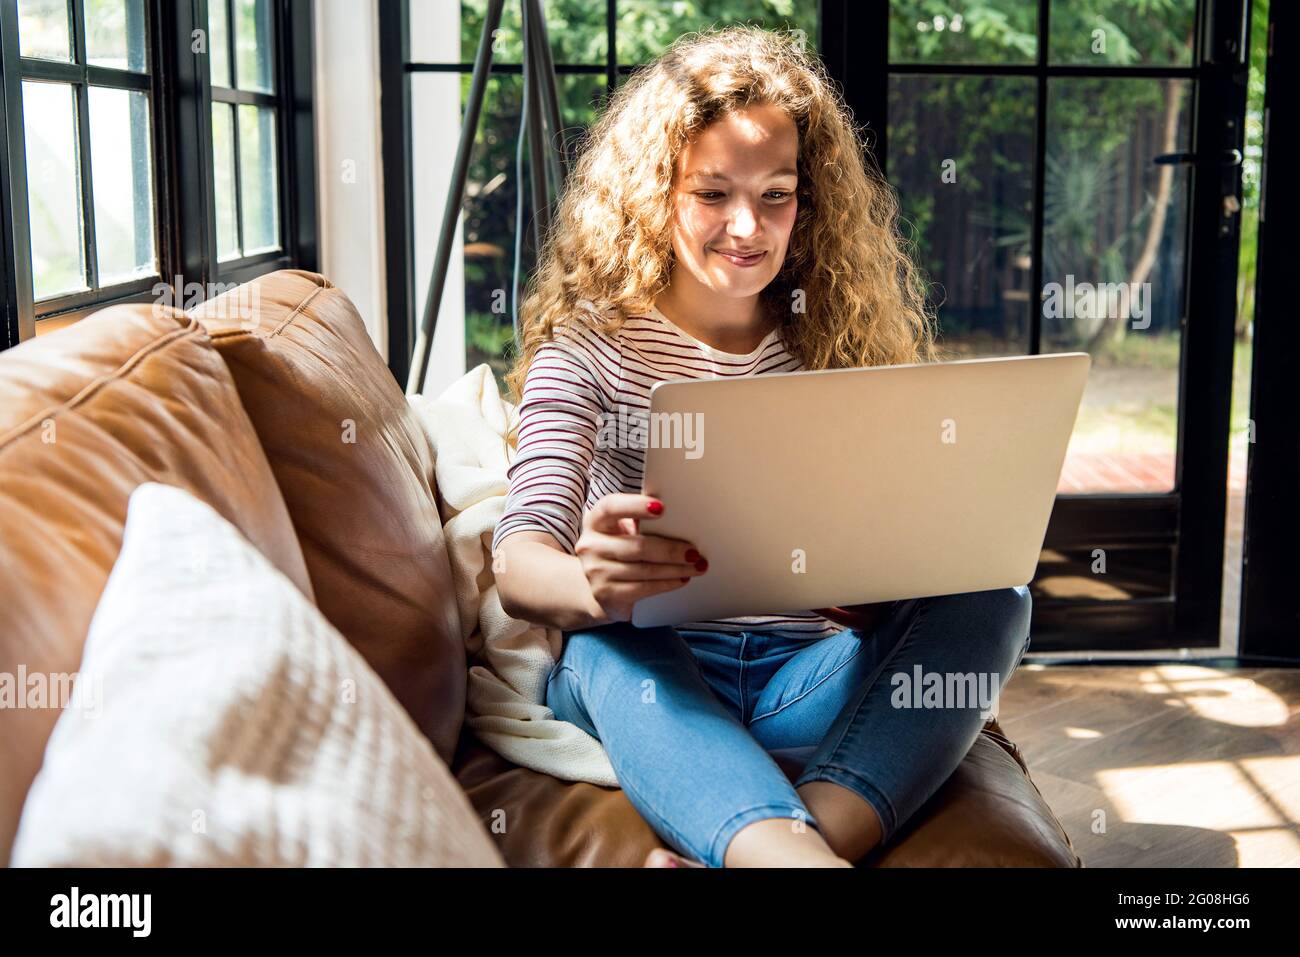 Pretty smiling Caucasian woman using laptop computer on the couch at home Stock Photo